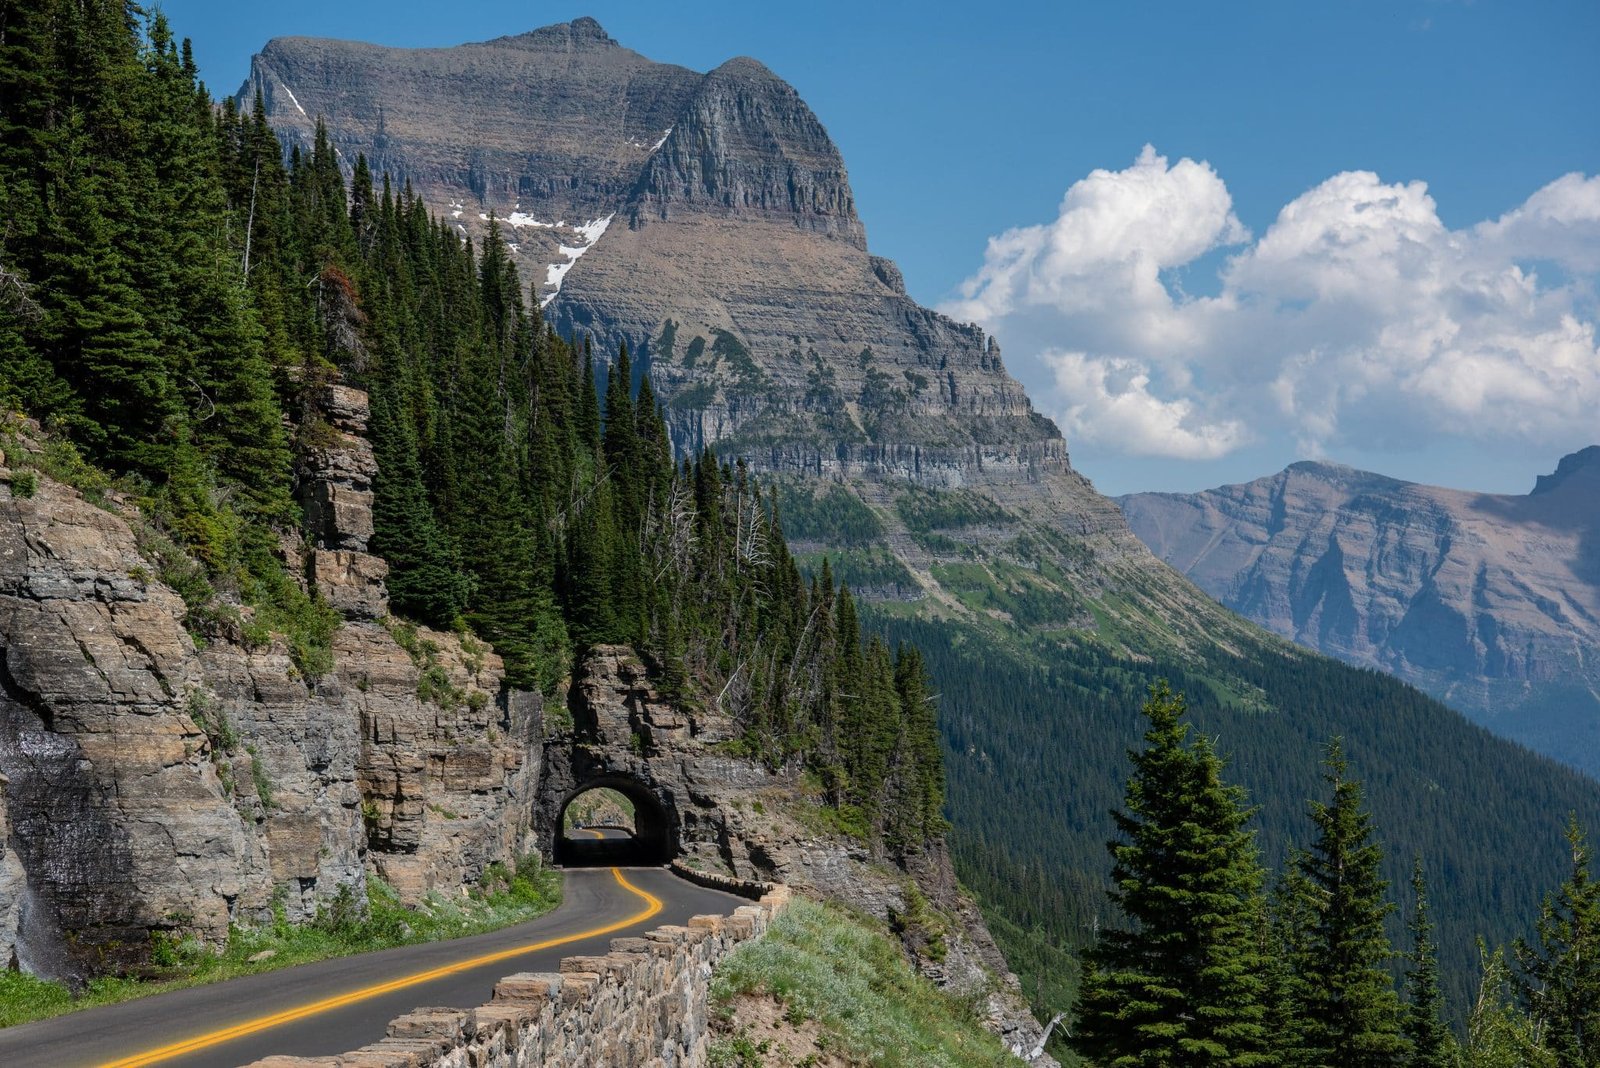 Going to the Sun Road leads you through the stunning landscape of Glacier National Park in Montana.